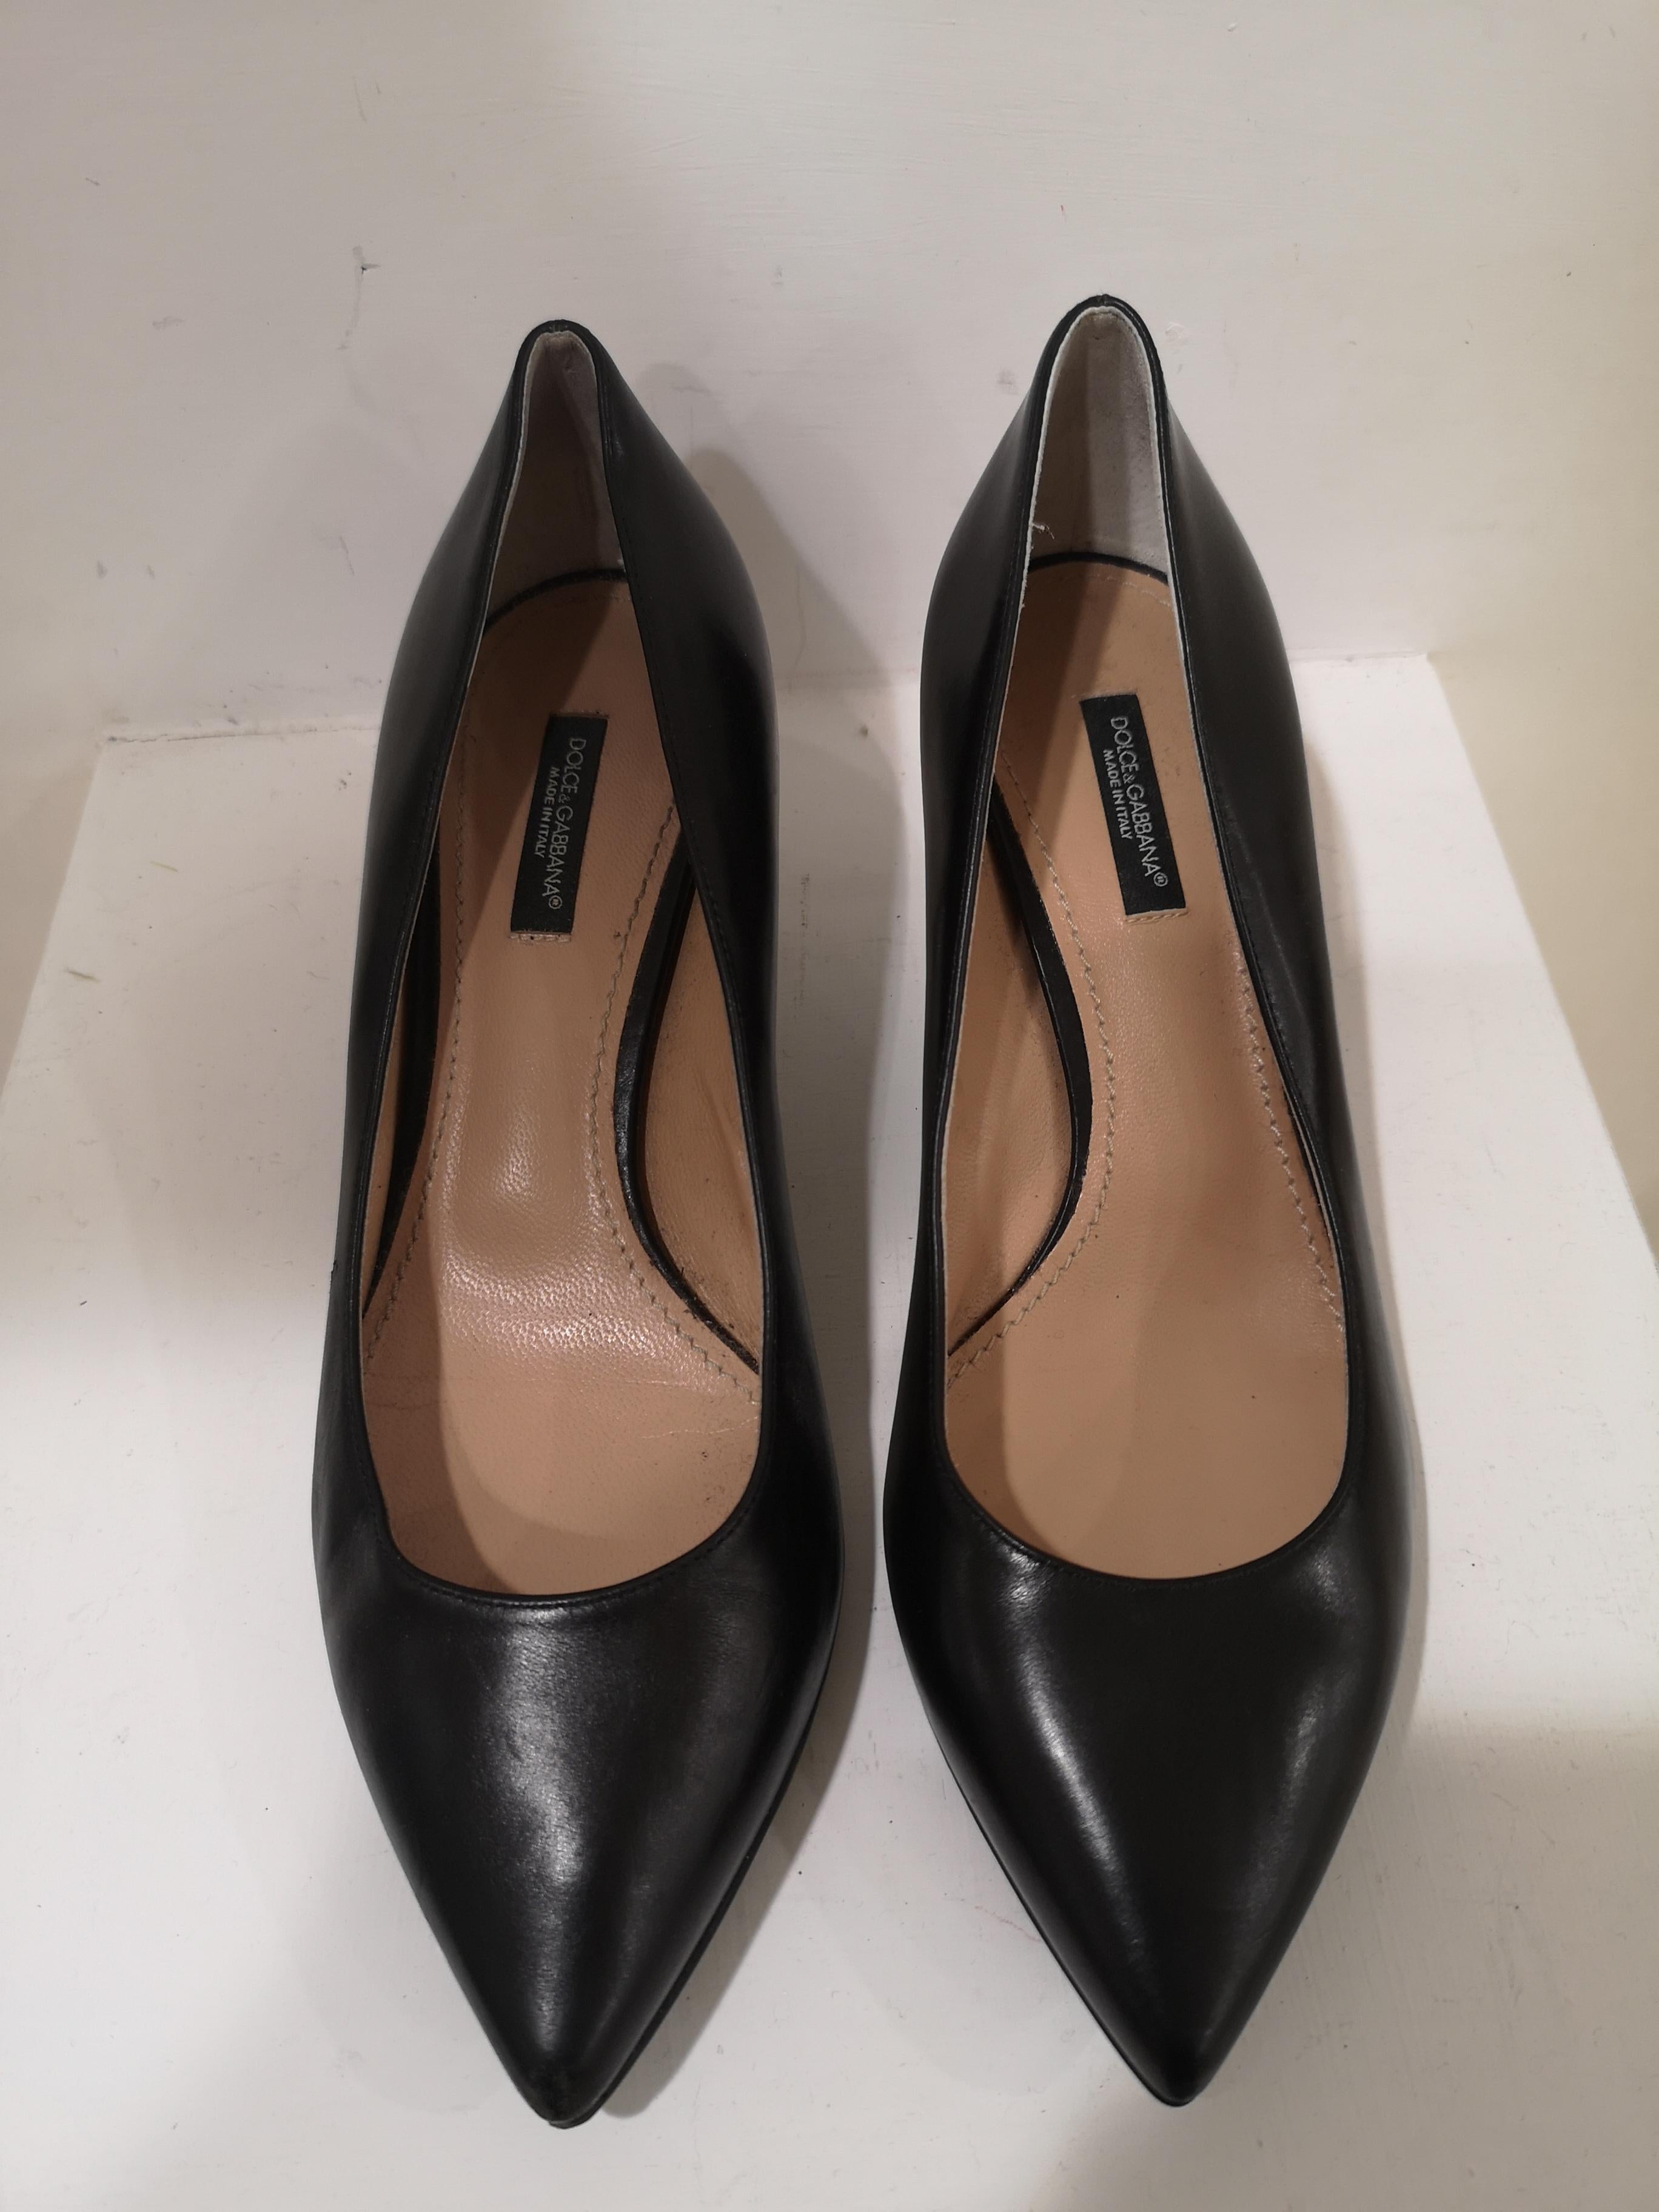 Dolce & Gabbana black leather decollete / shoes
totally made in italy size 37